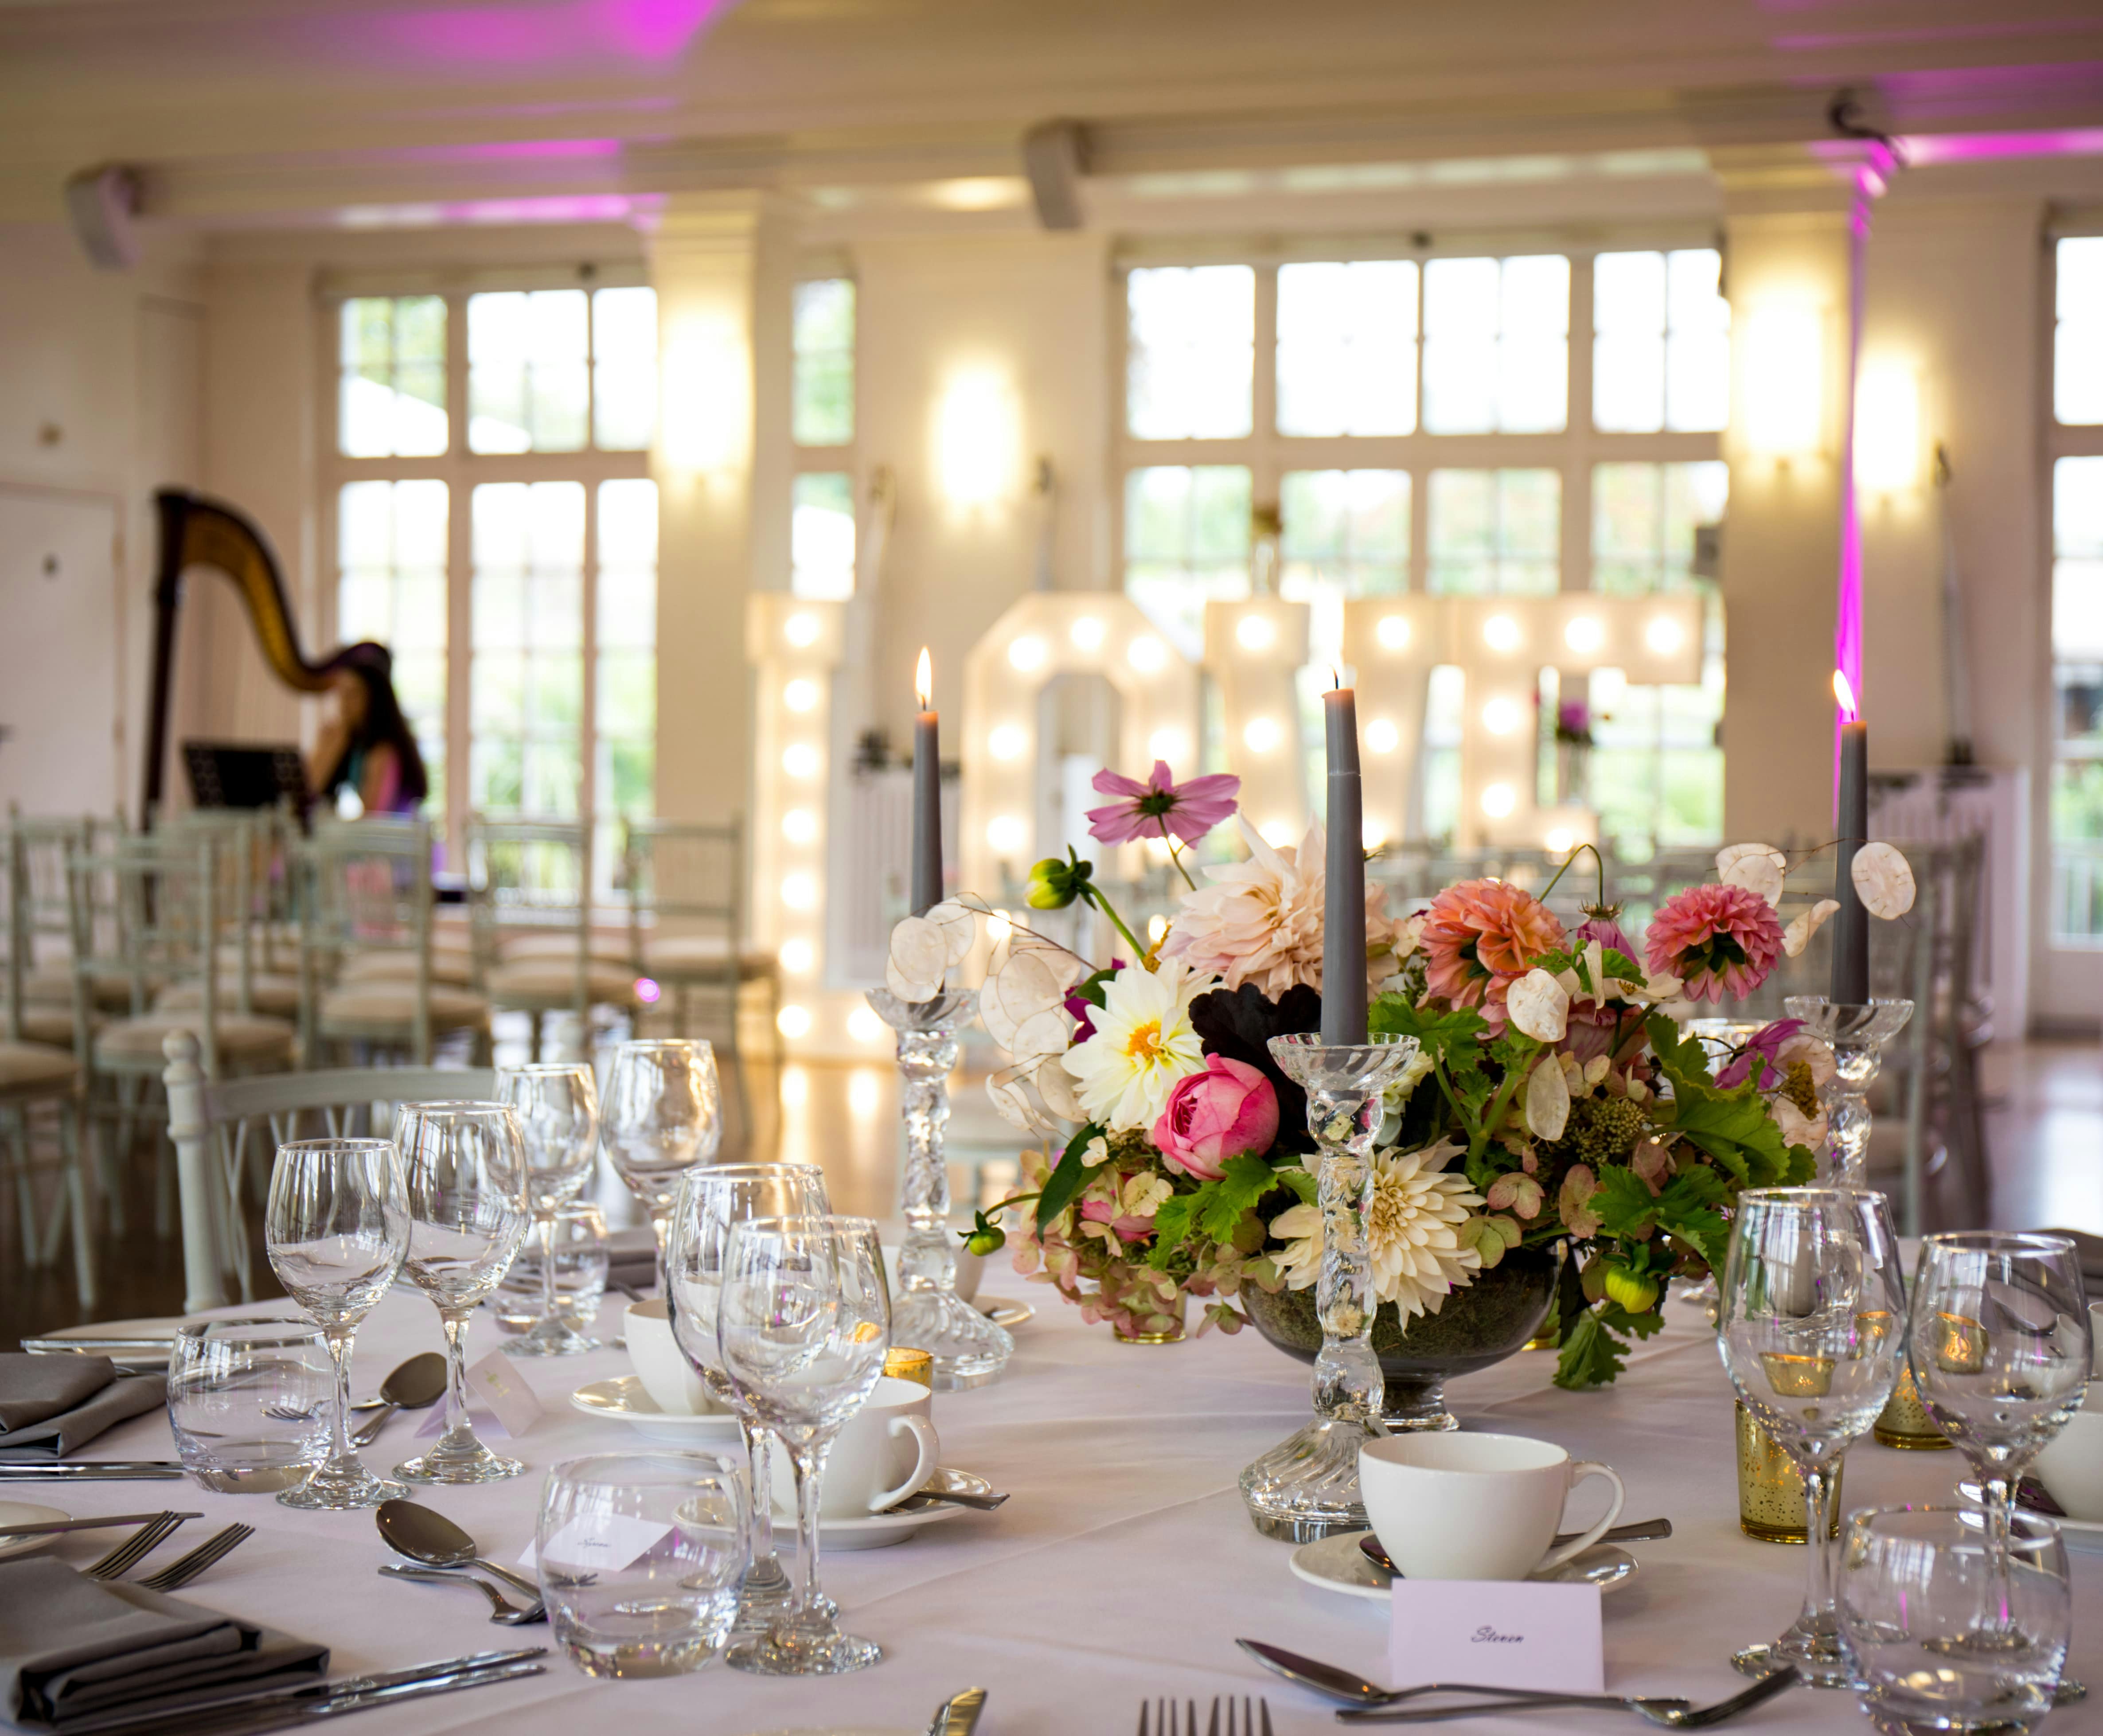 Small Wedding Venues in London - ZSL London Zoo